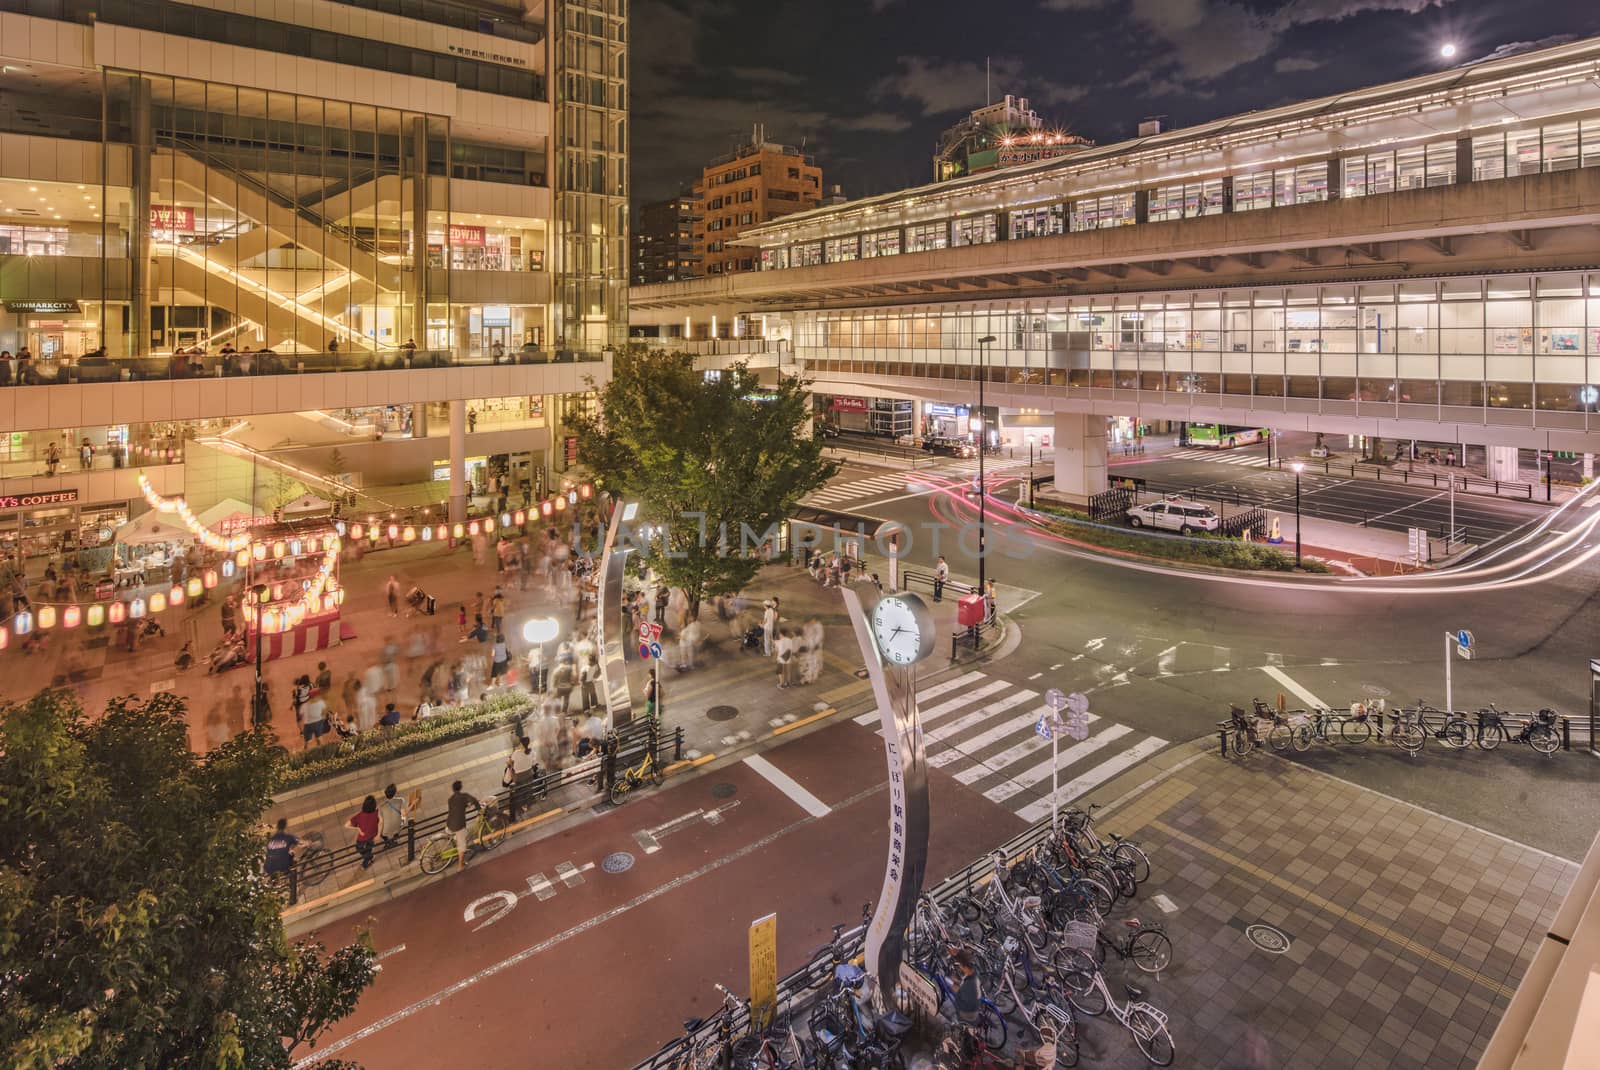 View of the square in front of the Nippori train station by kuremo